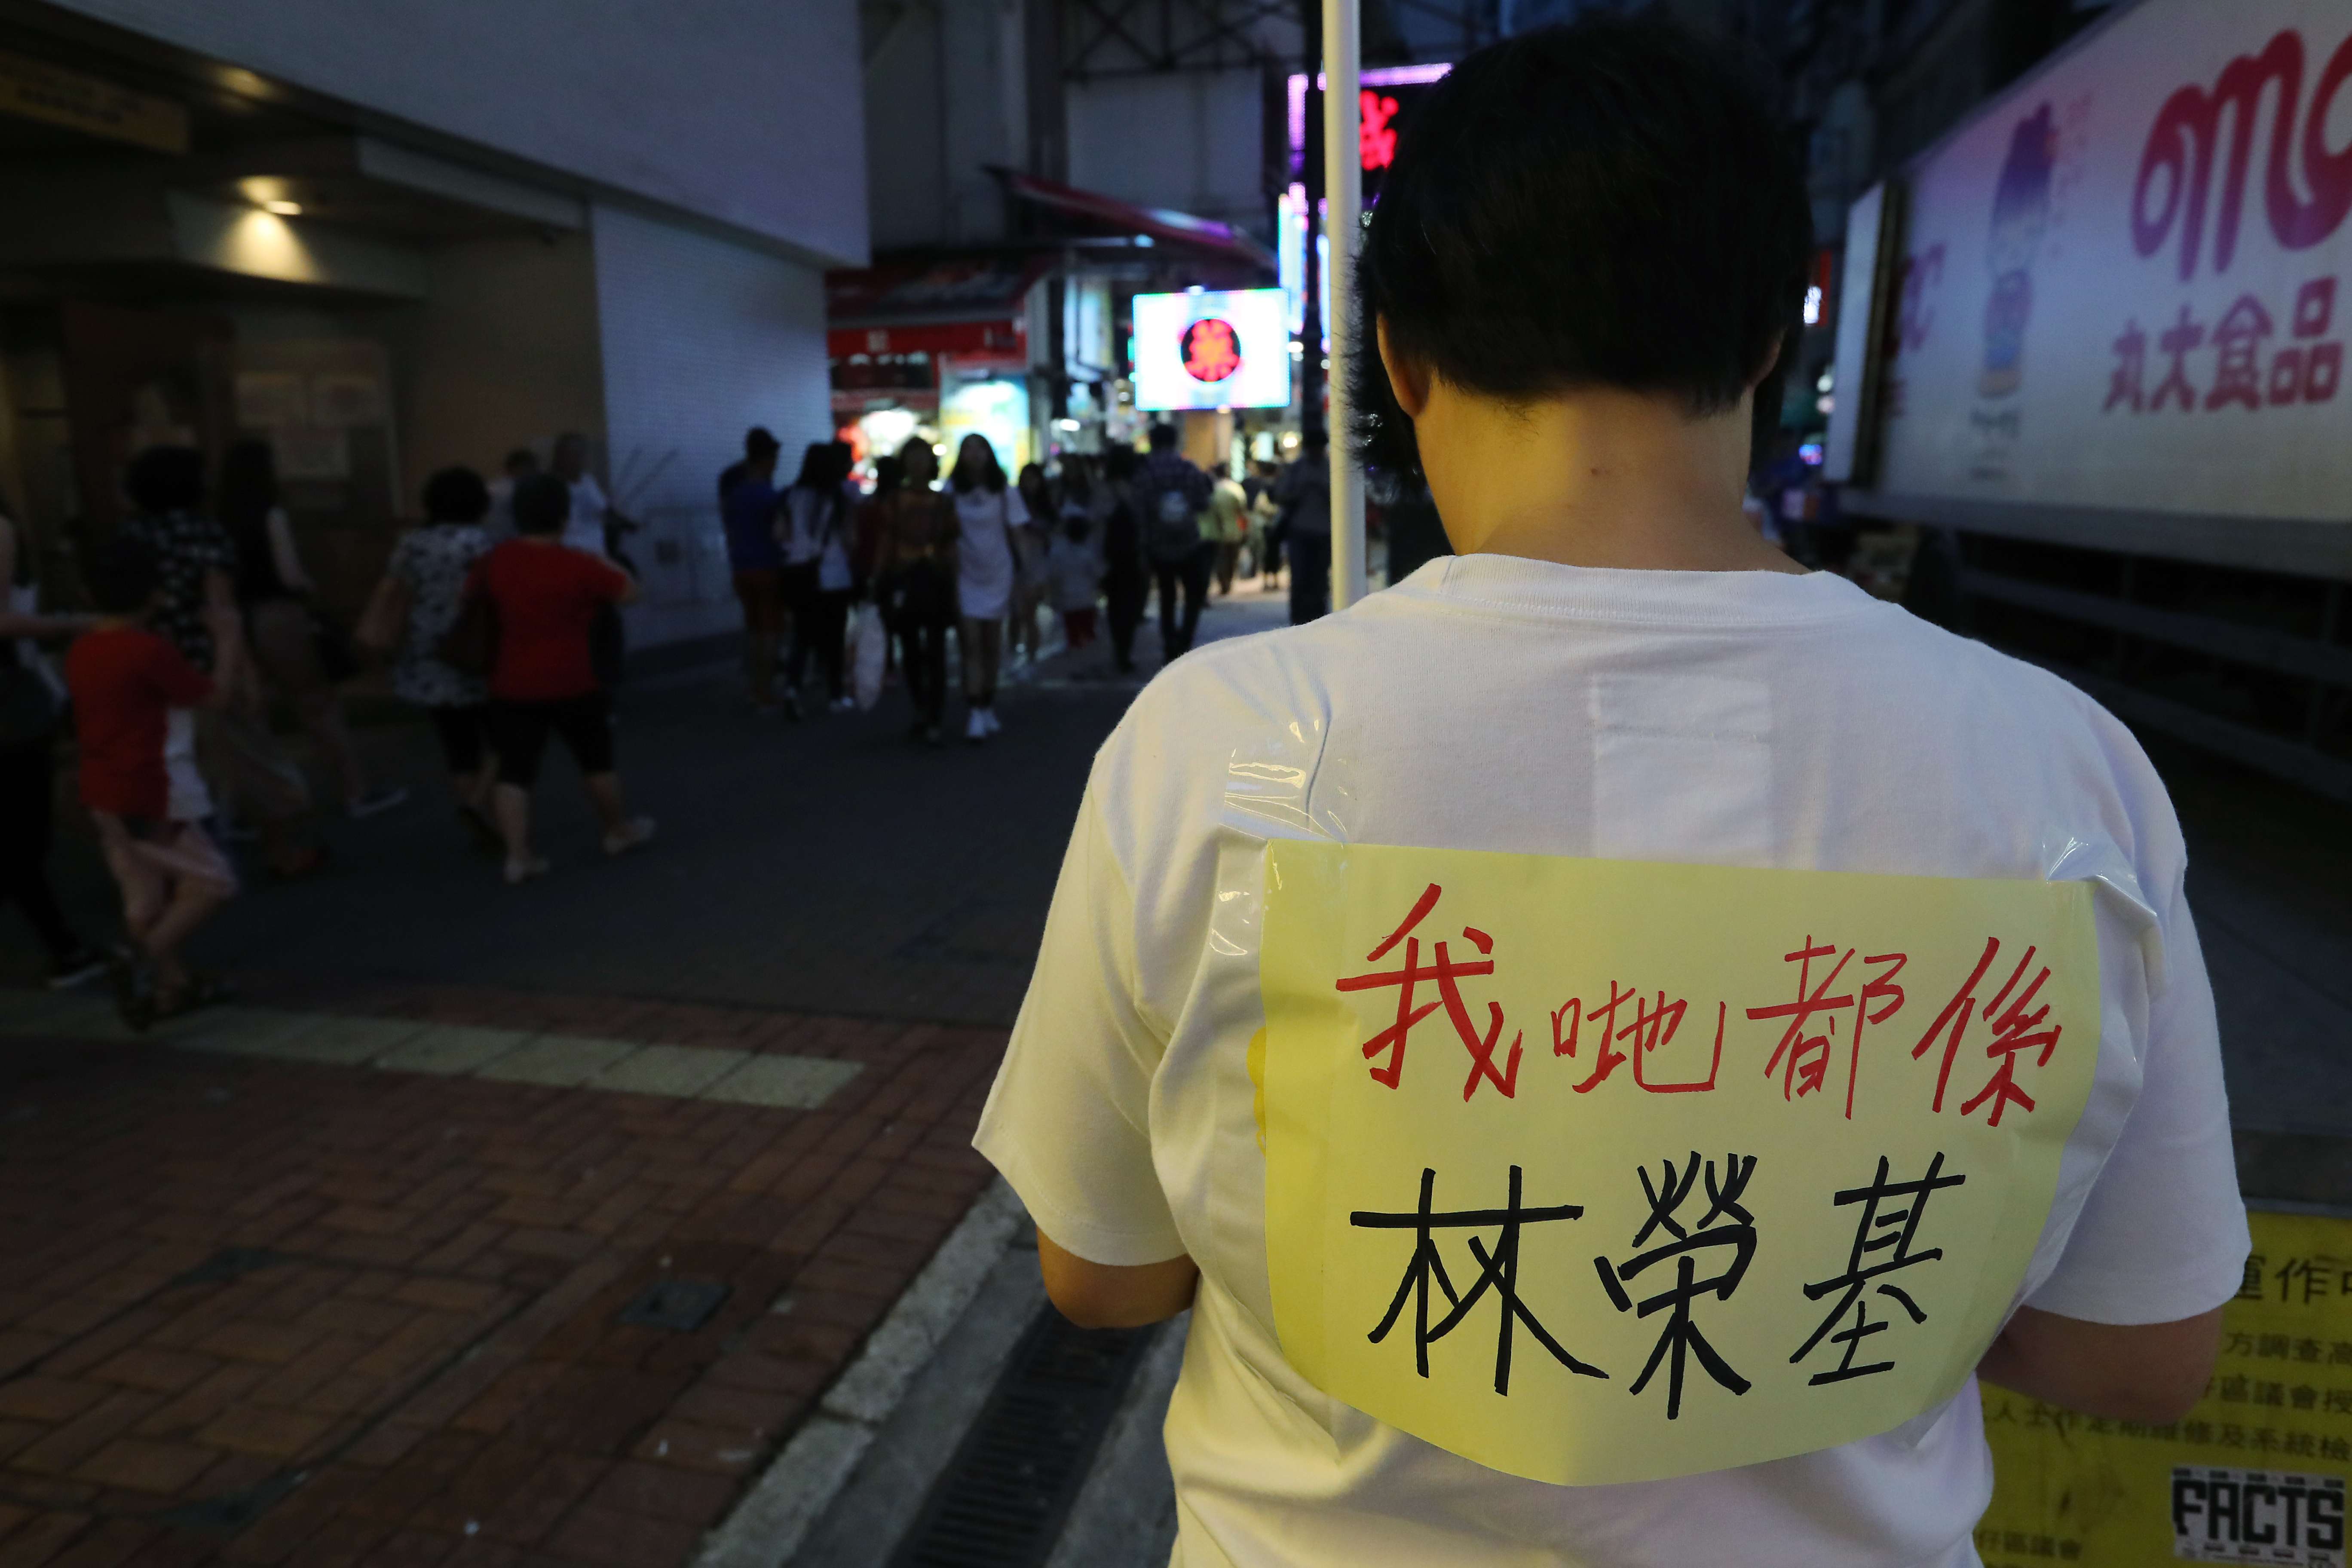 A member of Hong Kong’s Labour Party protests near Causeway Bay Books to support Lam Wing-kee, one of the five booksellers detained on the mainland. The sign he wears says “We’re all Lam Wing-kee”. Photo: Edward Wong